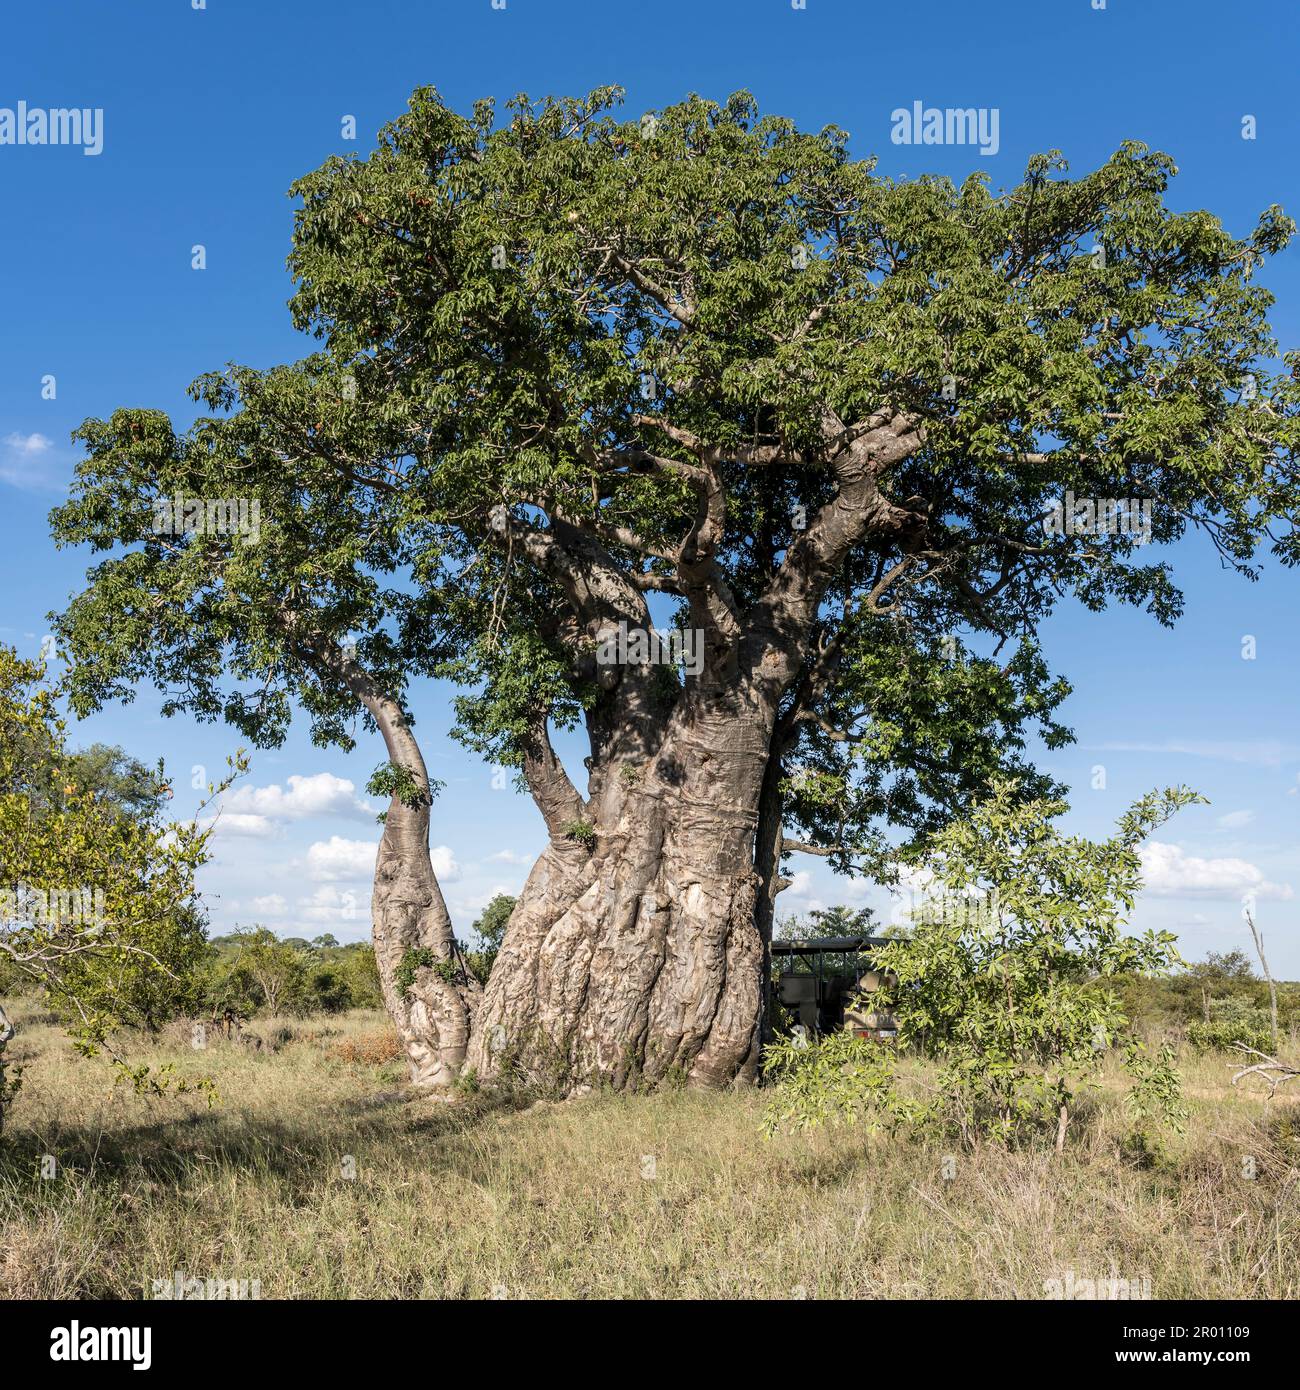 landscape with big Baobab tree in shrubland green wild countryside, shot in bright summer light, Kruger park, Mpumalanga, South Africa Stock Photo